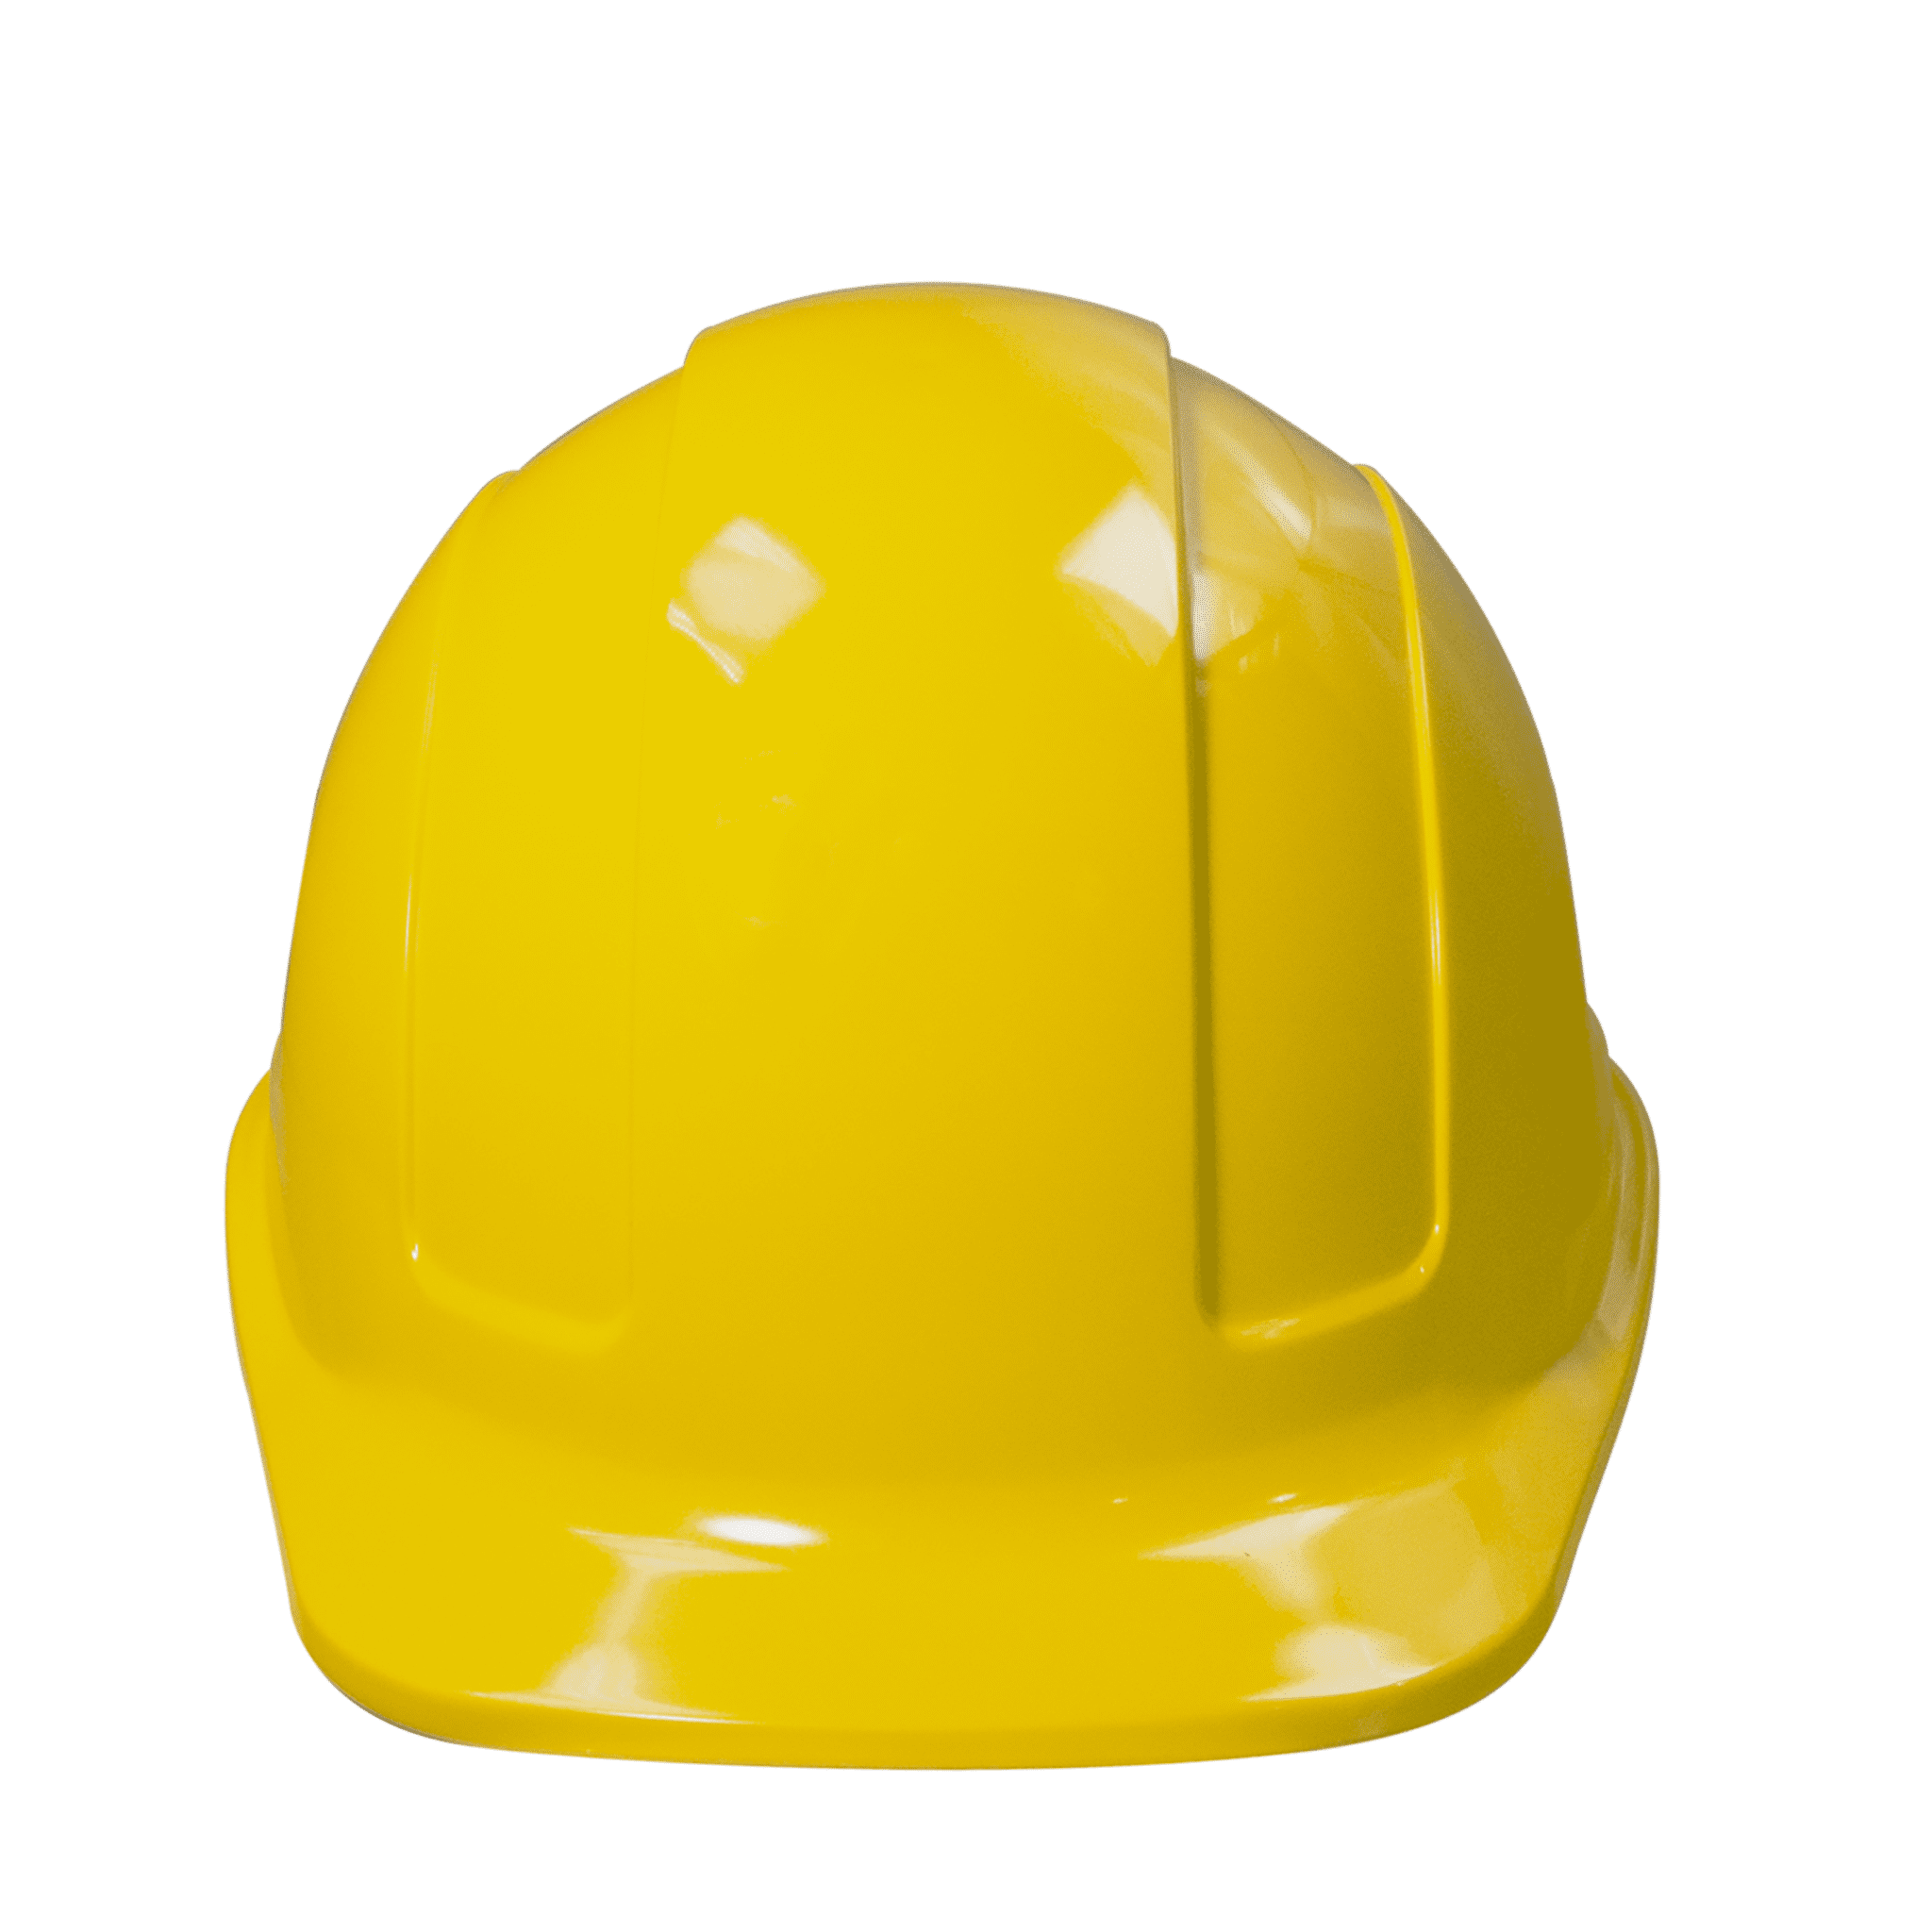 Red Home HDPE Full Brim Style Hard Hat Helmet w/Adjustable Ratchet Suspension For Work PPE By JORESTECH and General Headwear Protection ANSI Z89.1-14 Compliant 